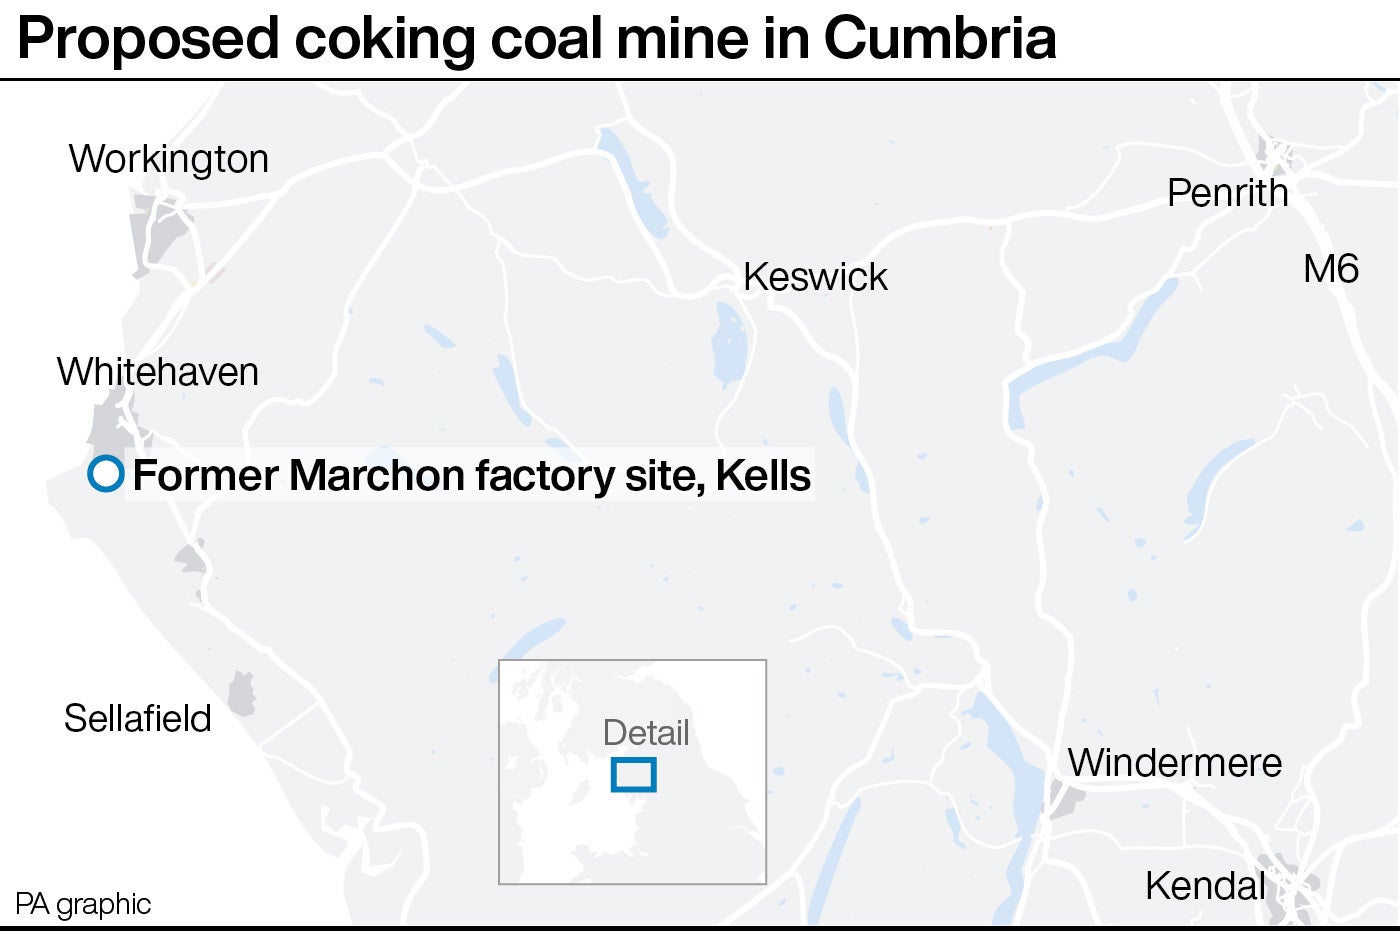 UK's planned Cumbria coal mine makes climate goals even harder to